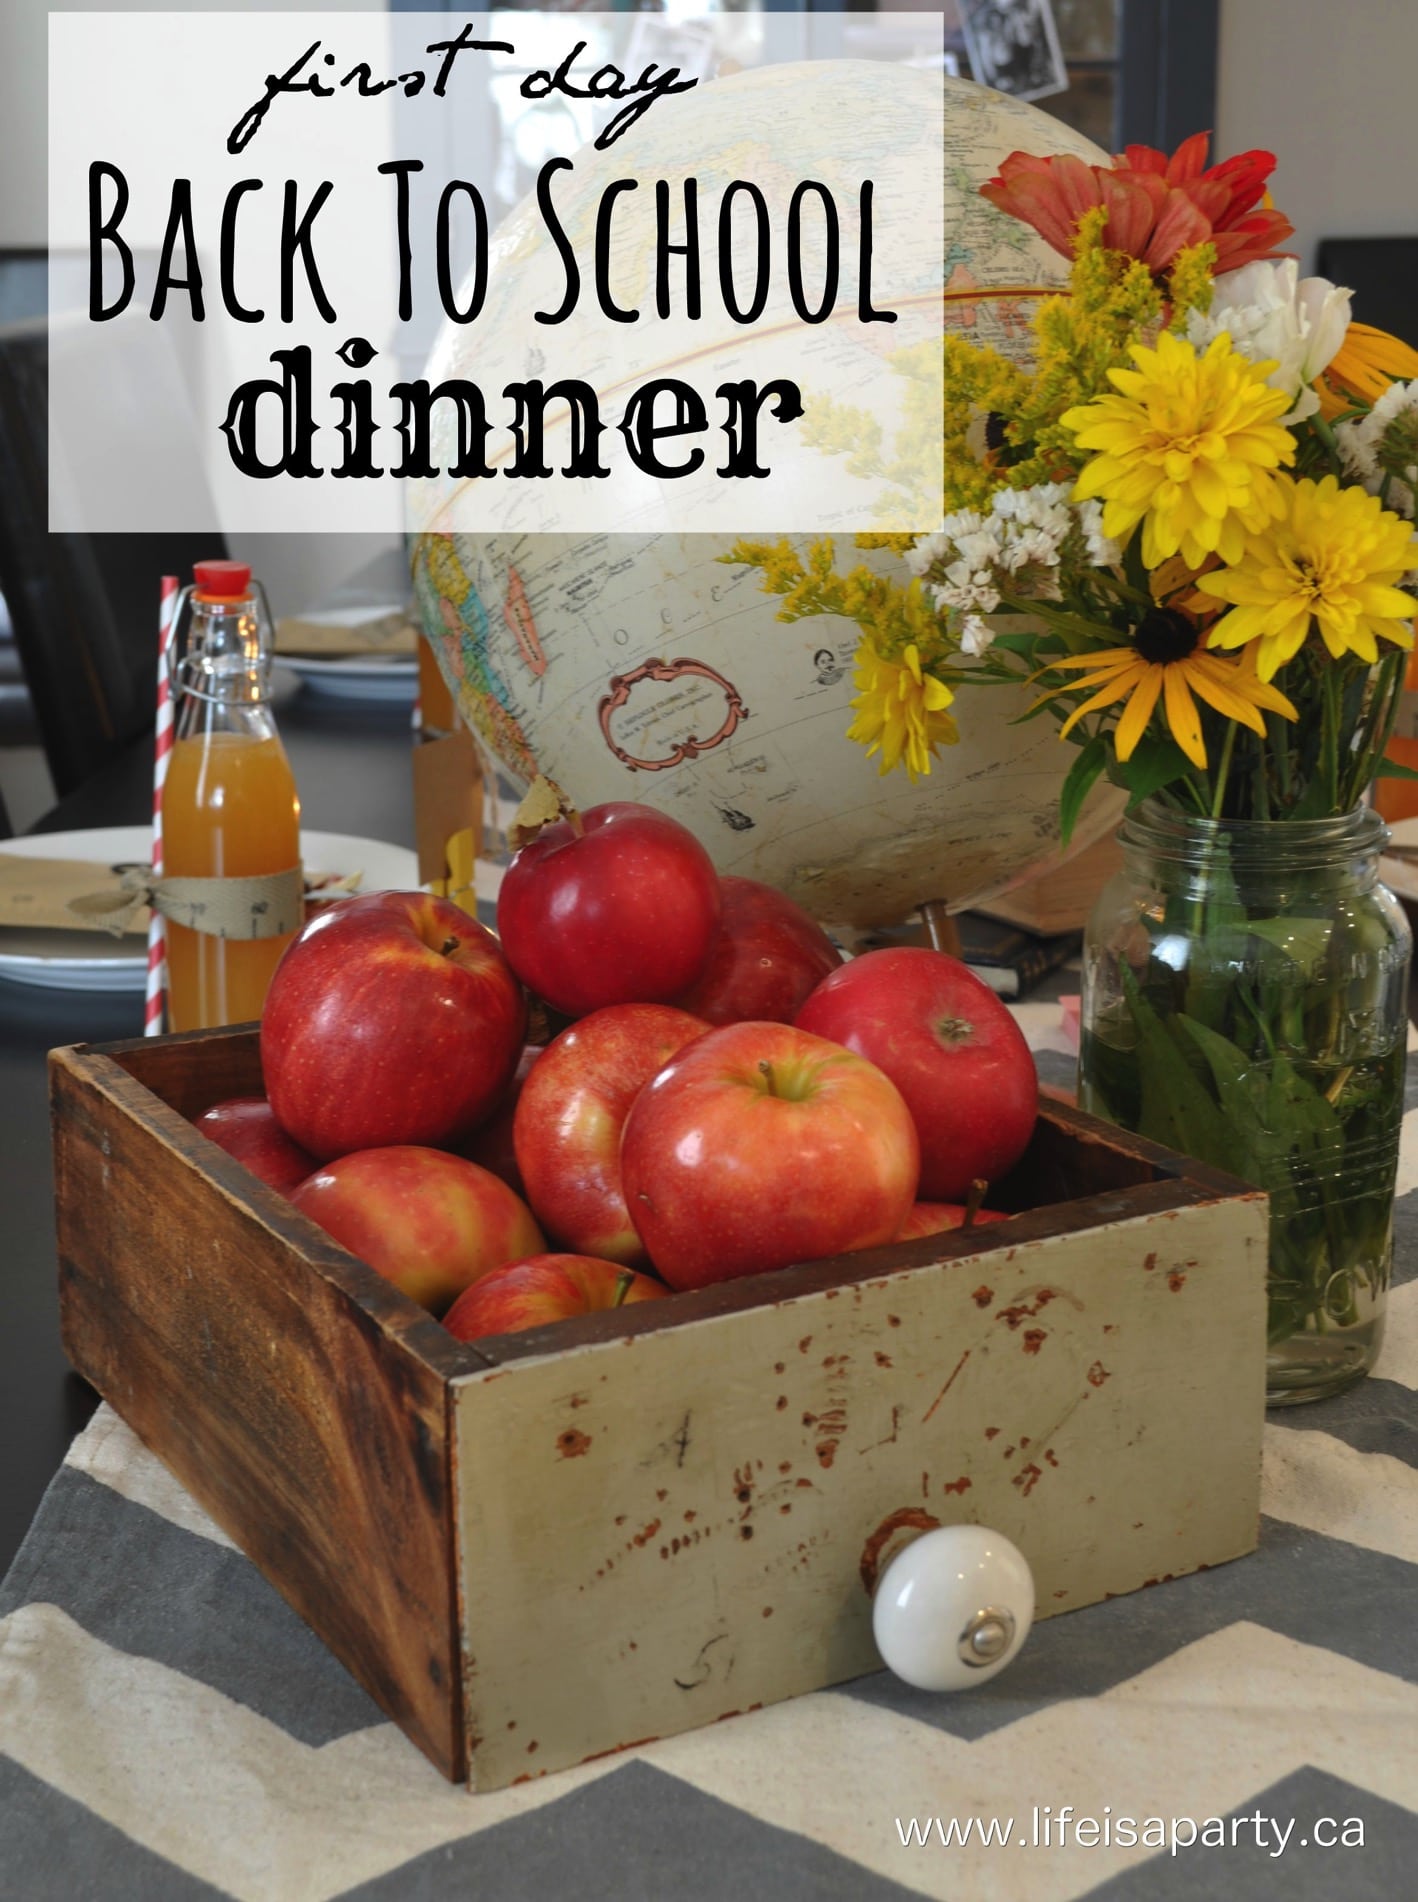 First Day Of School Dinner: celebrate back to school with a family dinner, with school themed decorations, and delicious menu ideas.